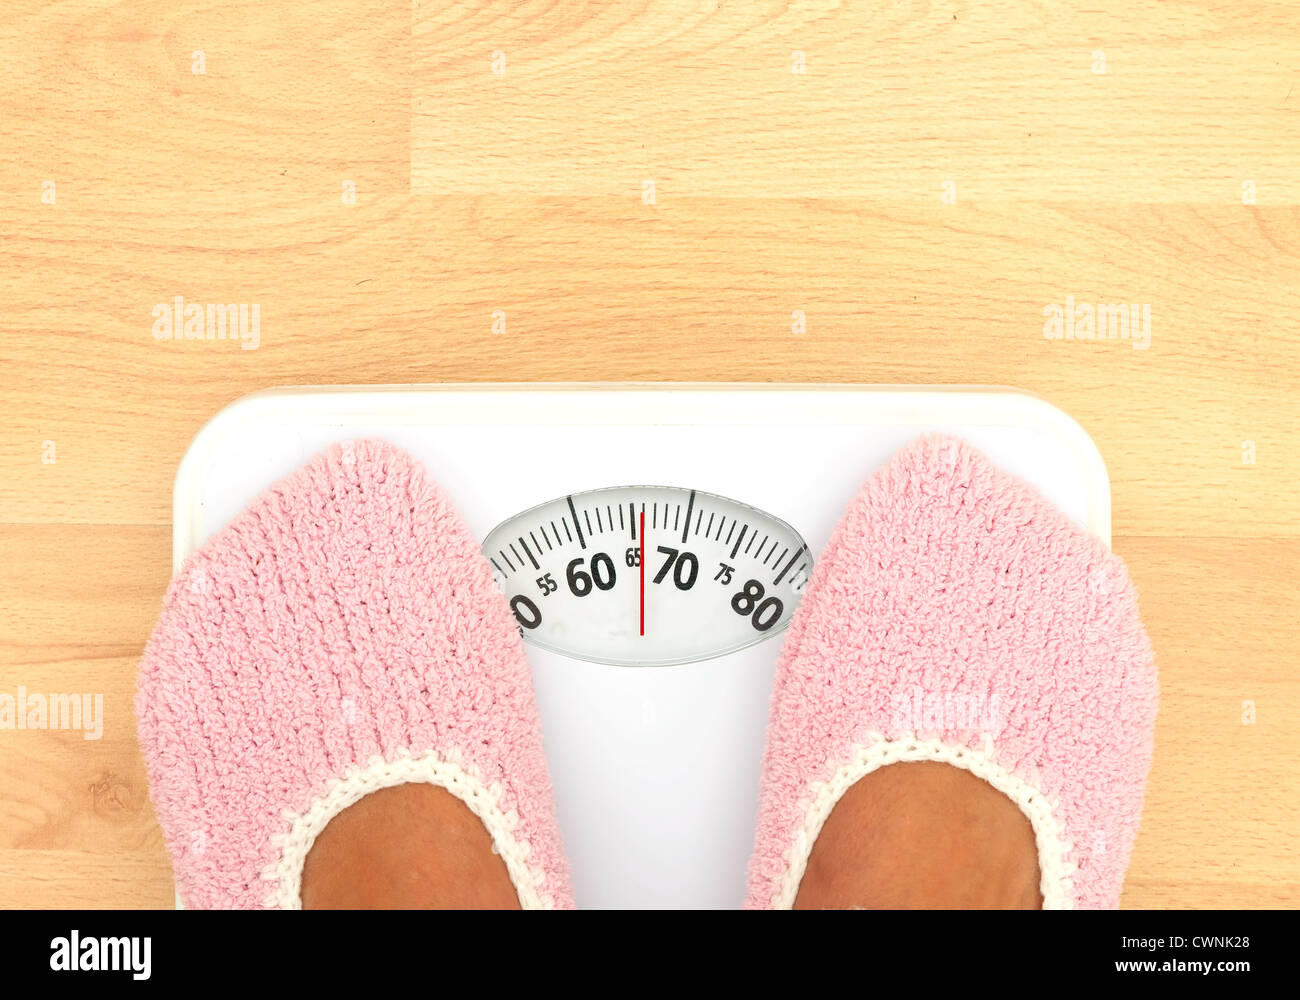 https://c8.alamy.com/comp/CWNK28/woman-in-woolly-pink-slippers-on-bathroom-scales-weight-watching-CWNK28.jpg